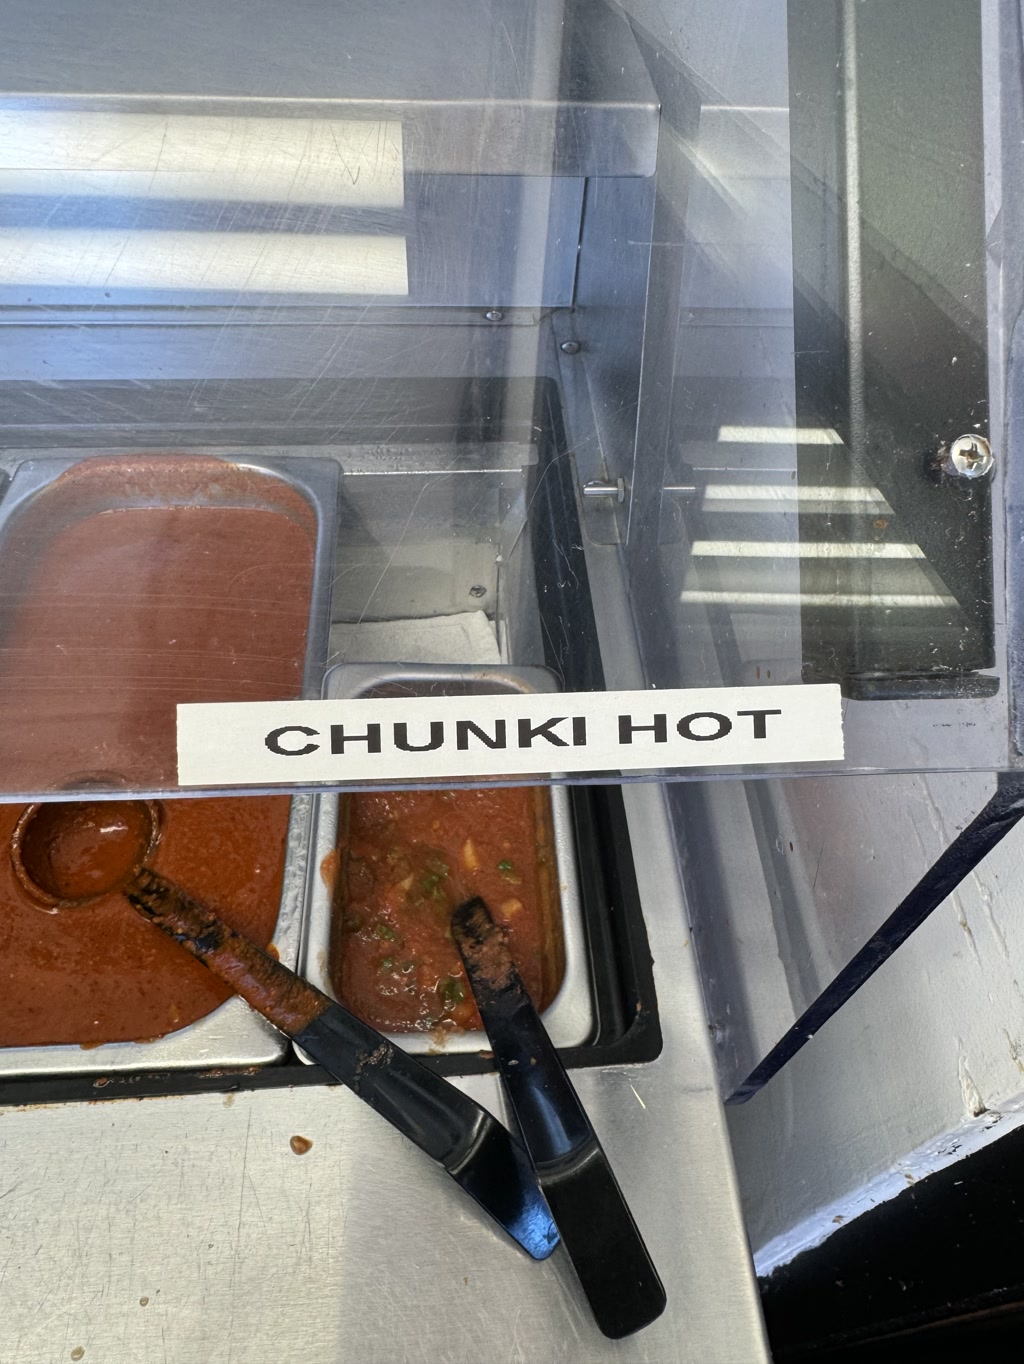 The photo shows two containers within a metal serving station, presumably at a food establishment. The container on the left appears to contain a smooth, mildly textured red sauce. The container on the right holds a chunkier sauce with visible green herbs and red base, likely some type of salsa. Both containers are equipped with black serving ladles that have stems exhibiting signs of frequent use indicated by their discolored and worn look. There is a label fixed above the containers with a text indicating the nature or name of the chunkier sauce.